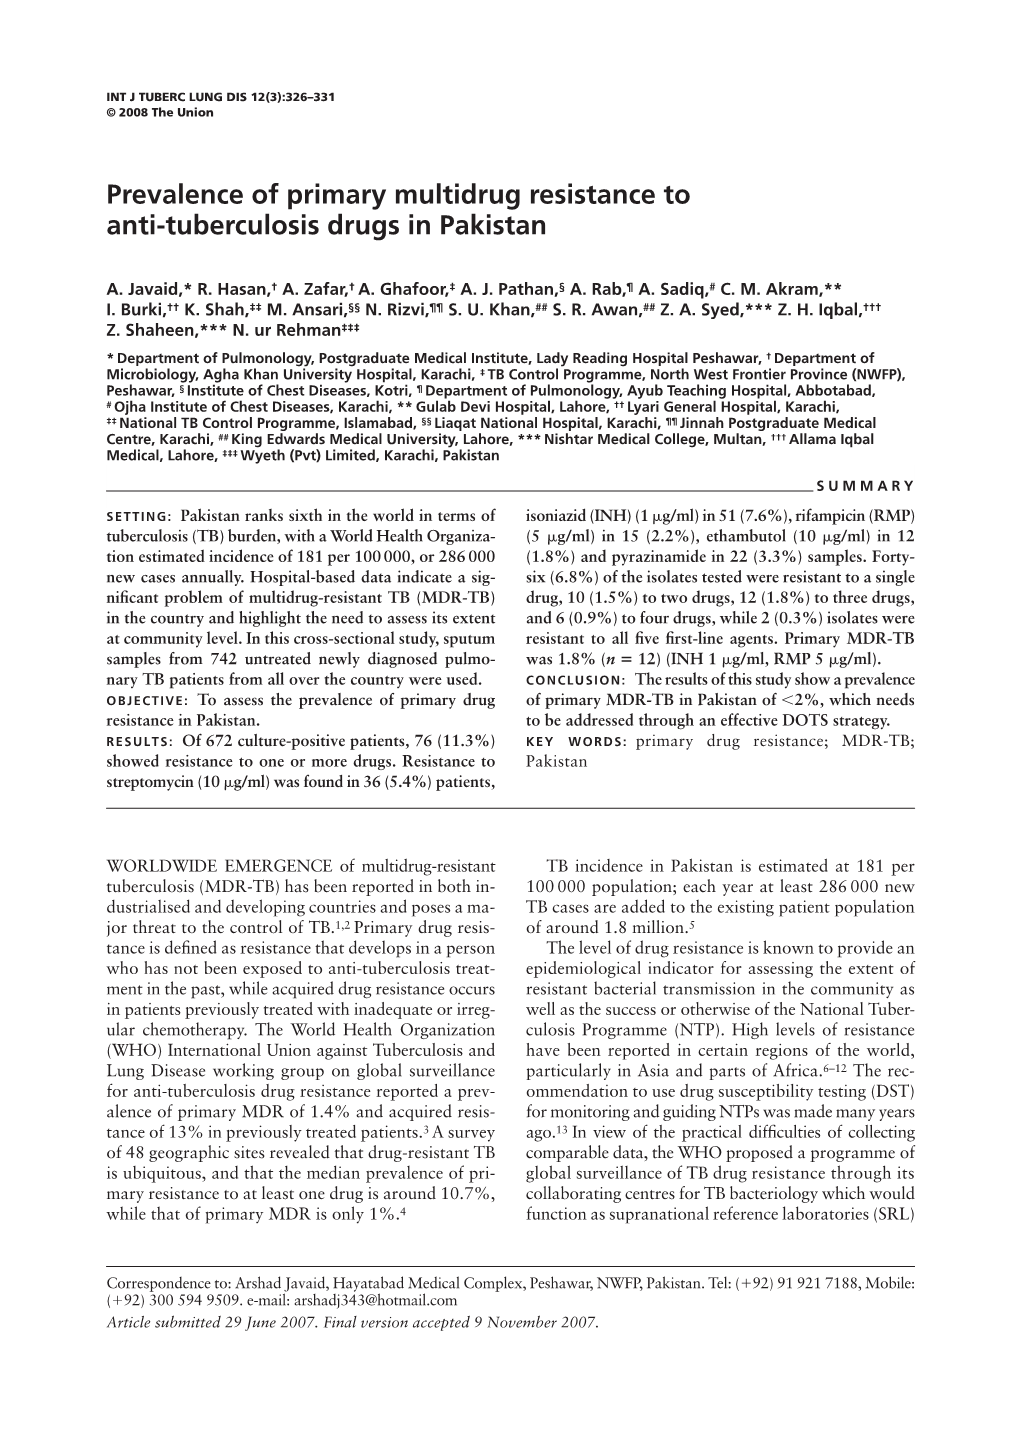 Prevalence of Primary Multidrug Resistance to Anti-Tuberculosis Drugs in Pakistan